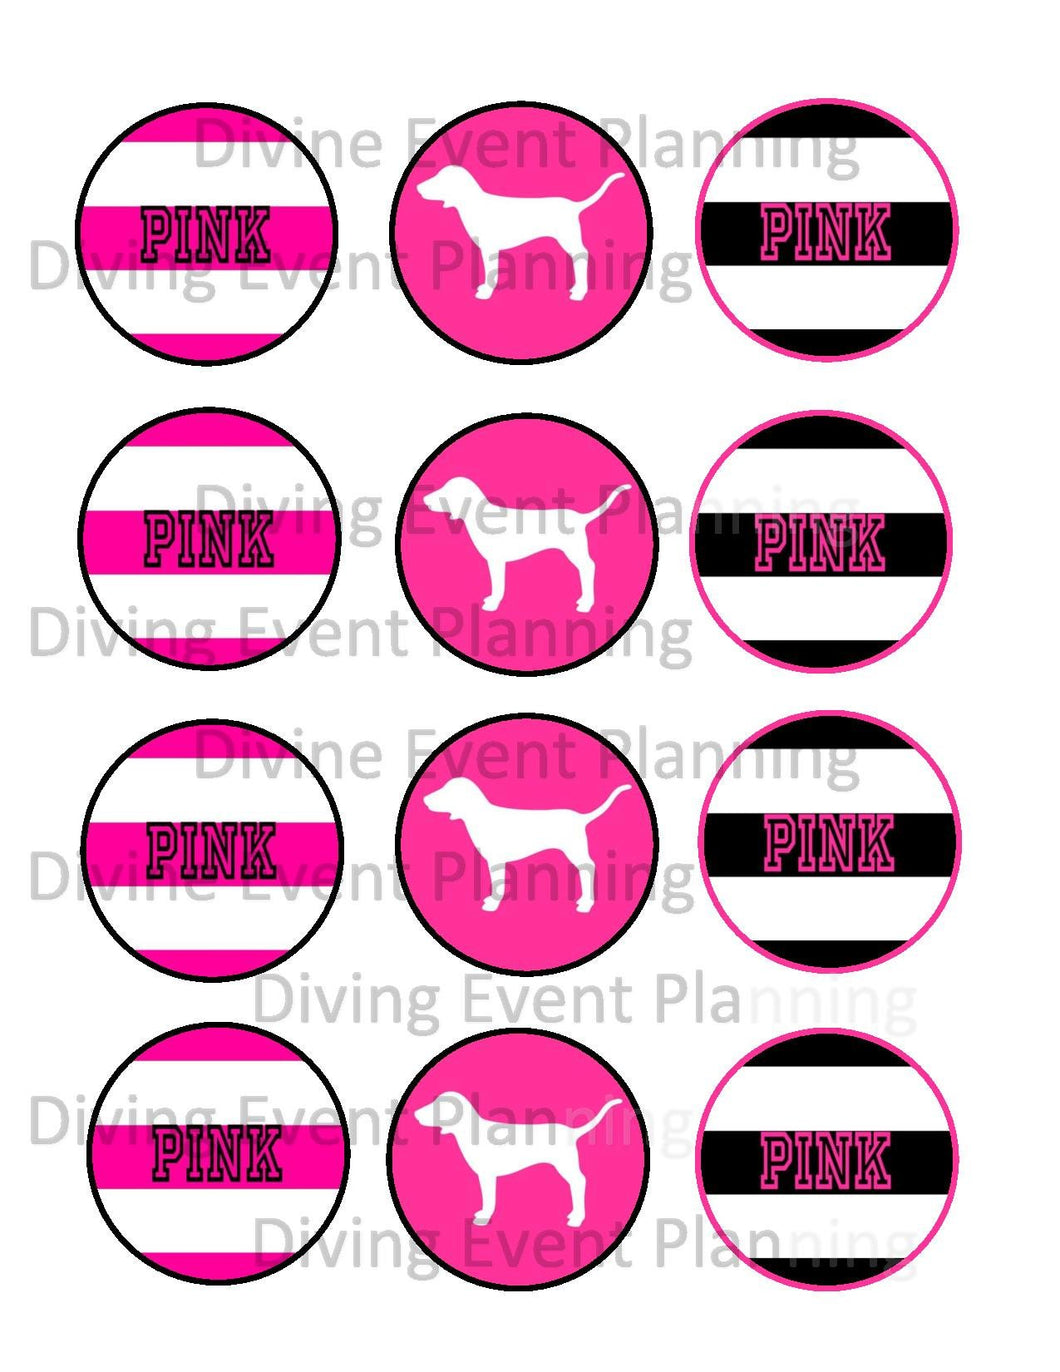 Designer Inspired cupcake toppers, printable - Diva Accessories N More